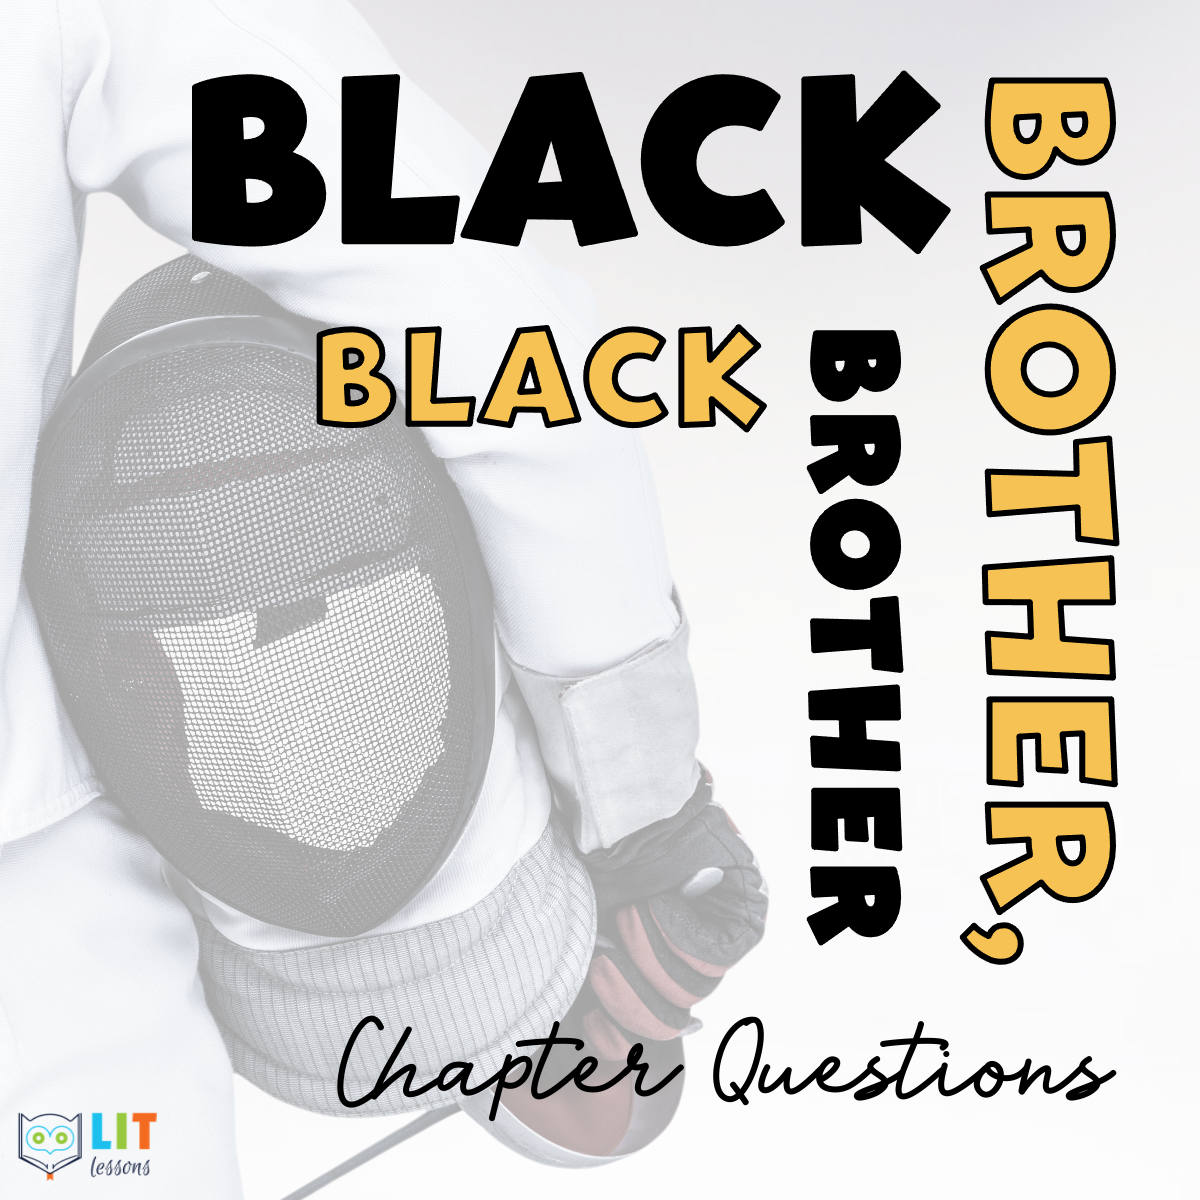 Black Brother, Black Brother Chapter Questions